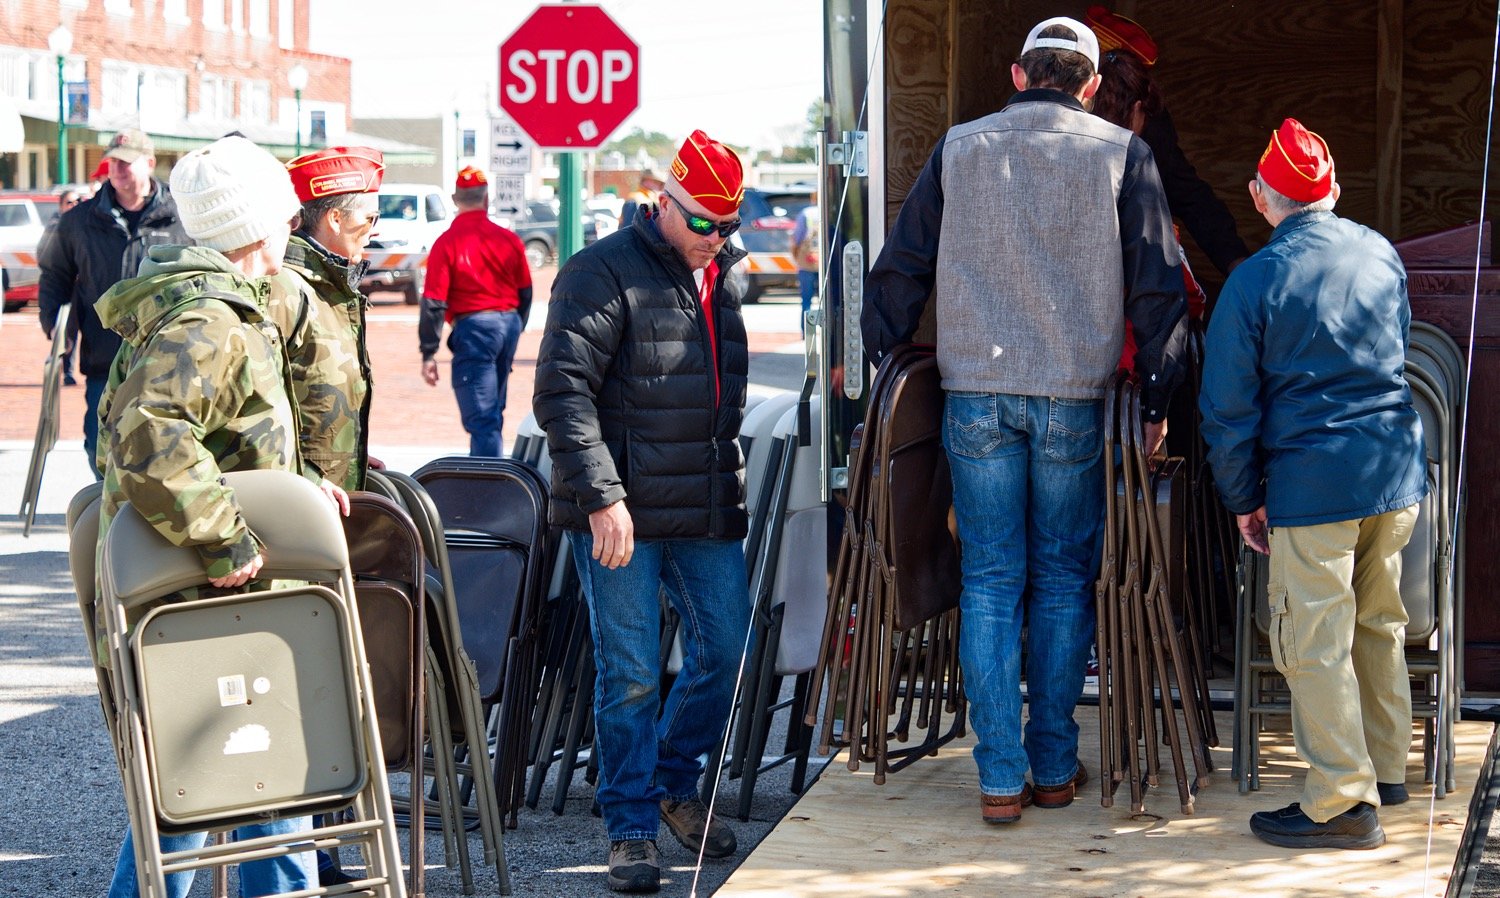 Following the ceremony, several Marine Corp League members along with a few others exhibit a servant’s heart by using many hands to make light work of packing the folding chairs put out for onlookers back into a trailer. [view more vets]